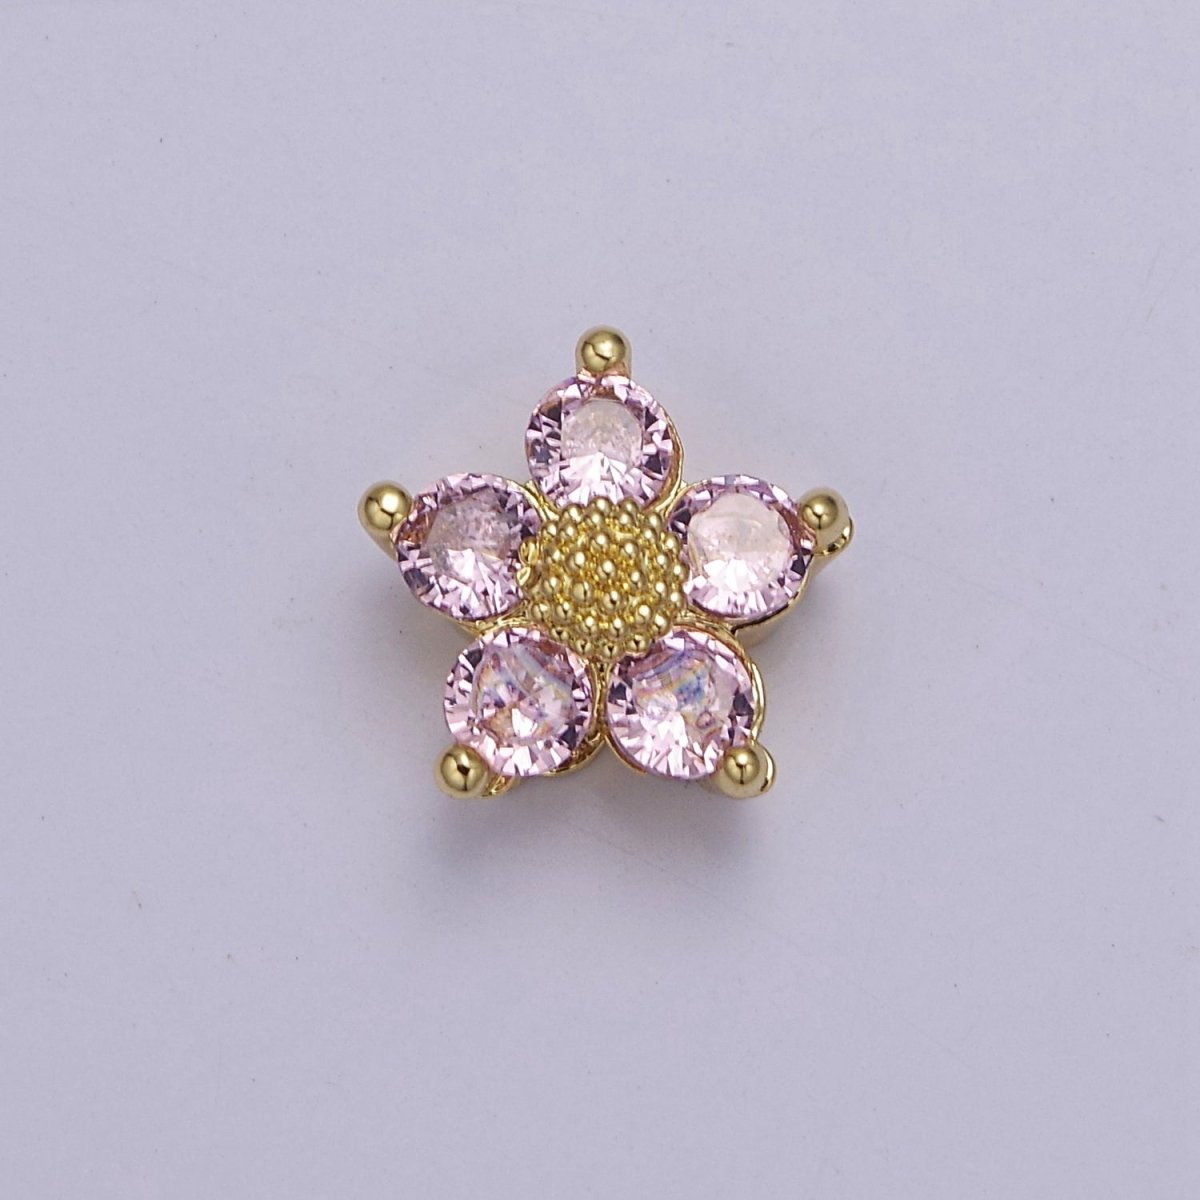 Dainty CZ Flower Spacer Bead, Gold Floral Spacer Beads Pink Clear Purple Green CZ Spacer Beads, Small Daisy Spacers for Bracelet Necklace B-088 B-136 B-171 B-176 B-177 - DLUXCA